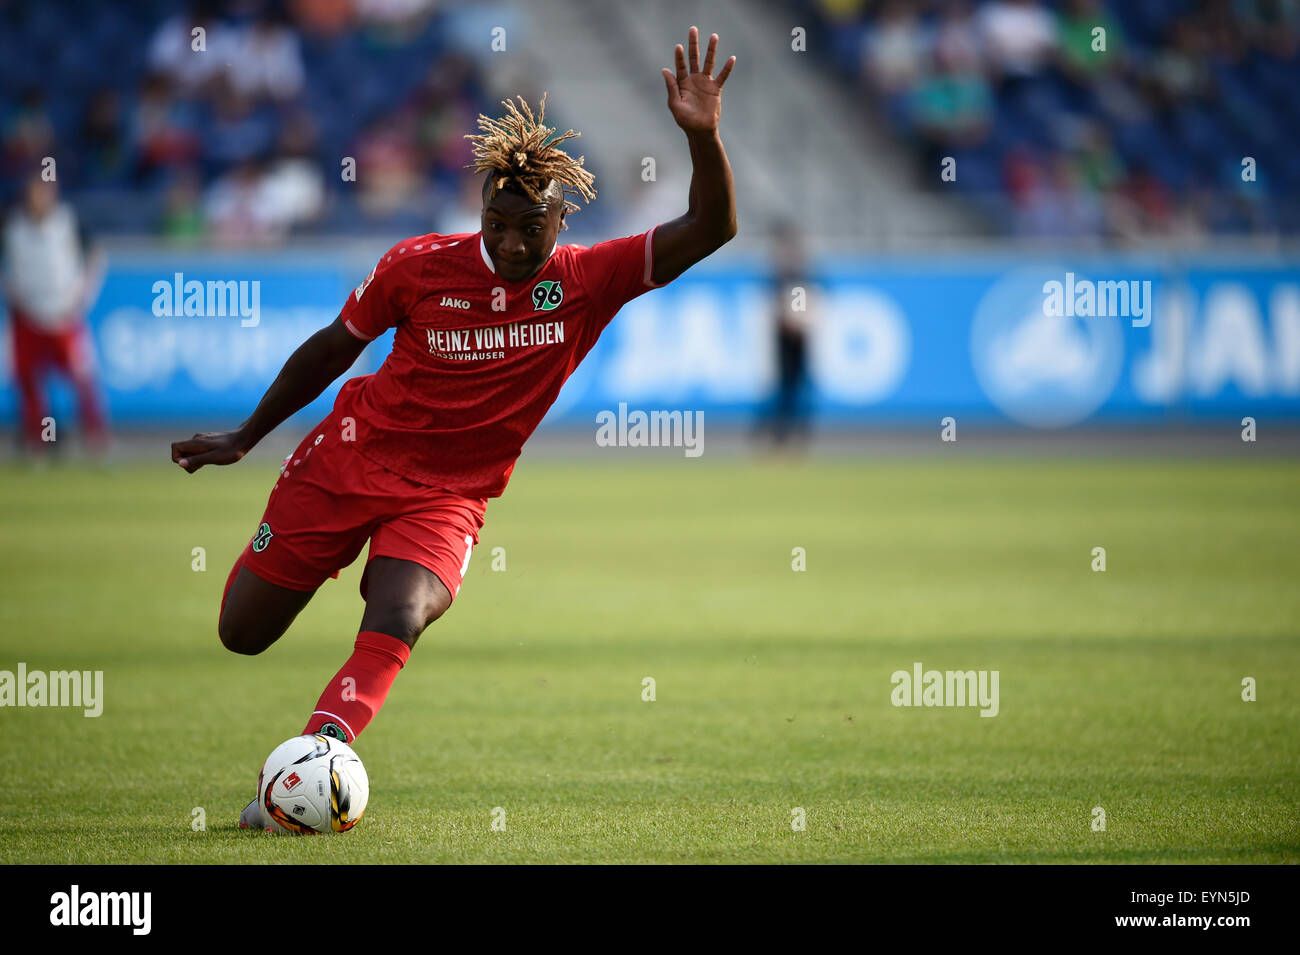 Hannover's Allan Saint-Maximin in action during the soccer friendly between Hannover 96 and AFC Sunderland at the HDI-Arena in Hannover, Germany, 1 August 2015. PHOTO: ALEXANDER KOERNER Stock Photo